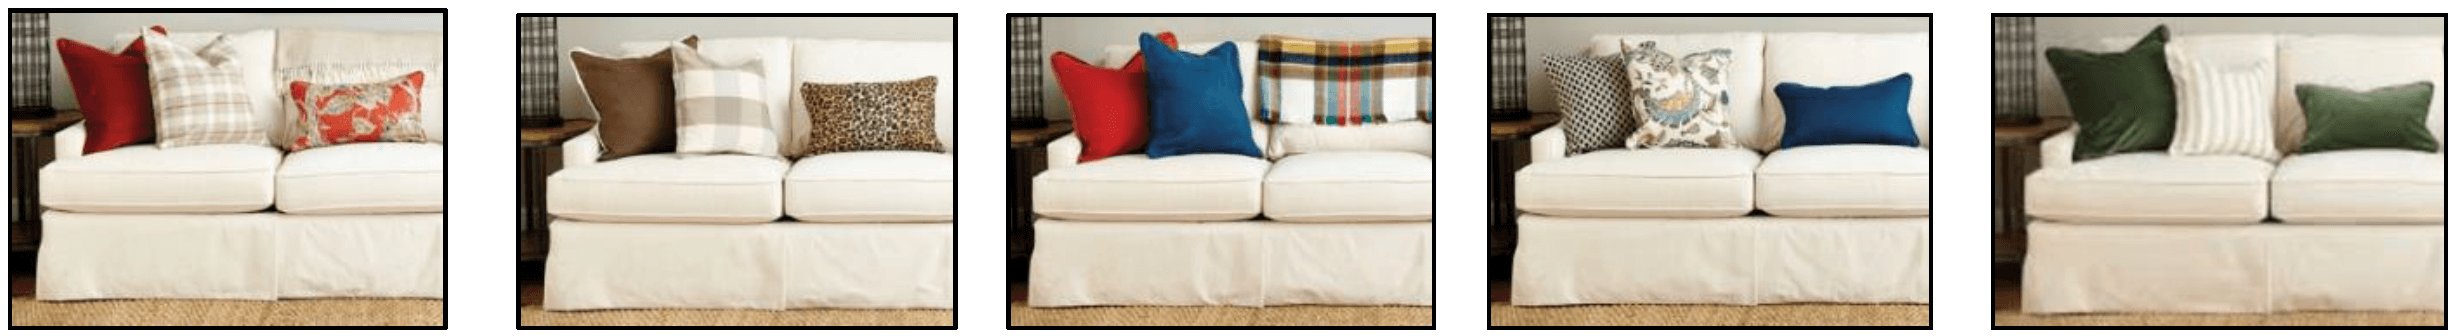 Replace cushions for spring to give a brand new look